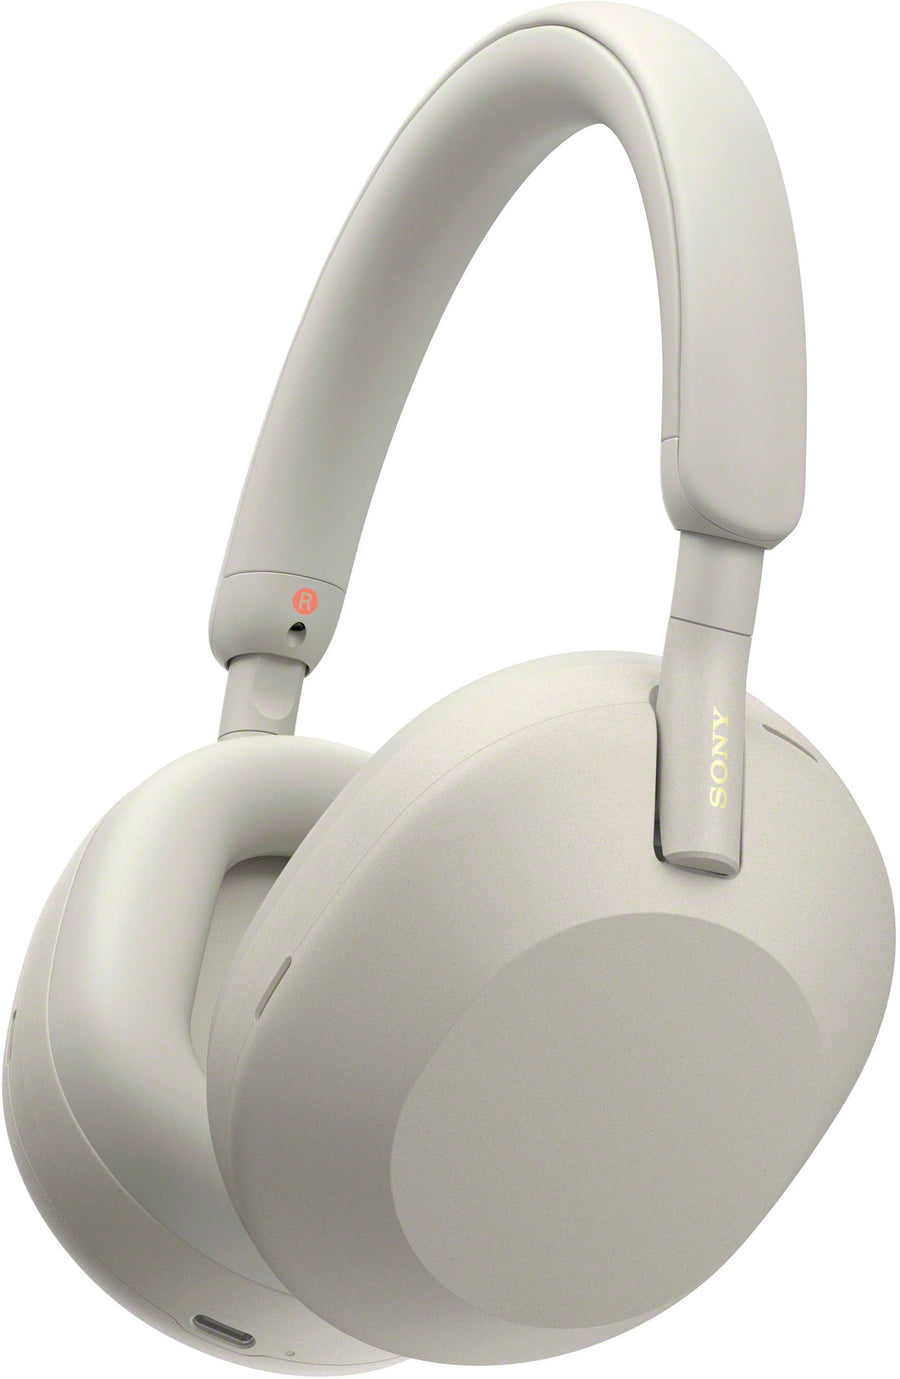 Sony - WH-1000XM5 Wireless Noise-Canceling Over-the-Ear Headphones - Silver_0